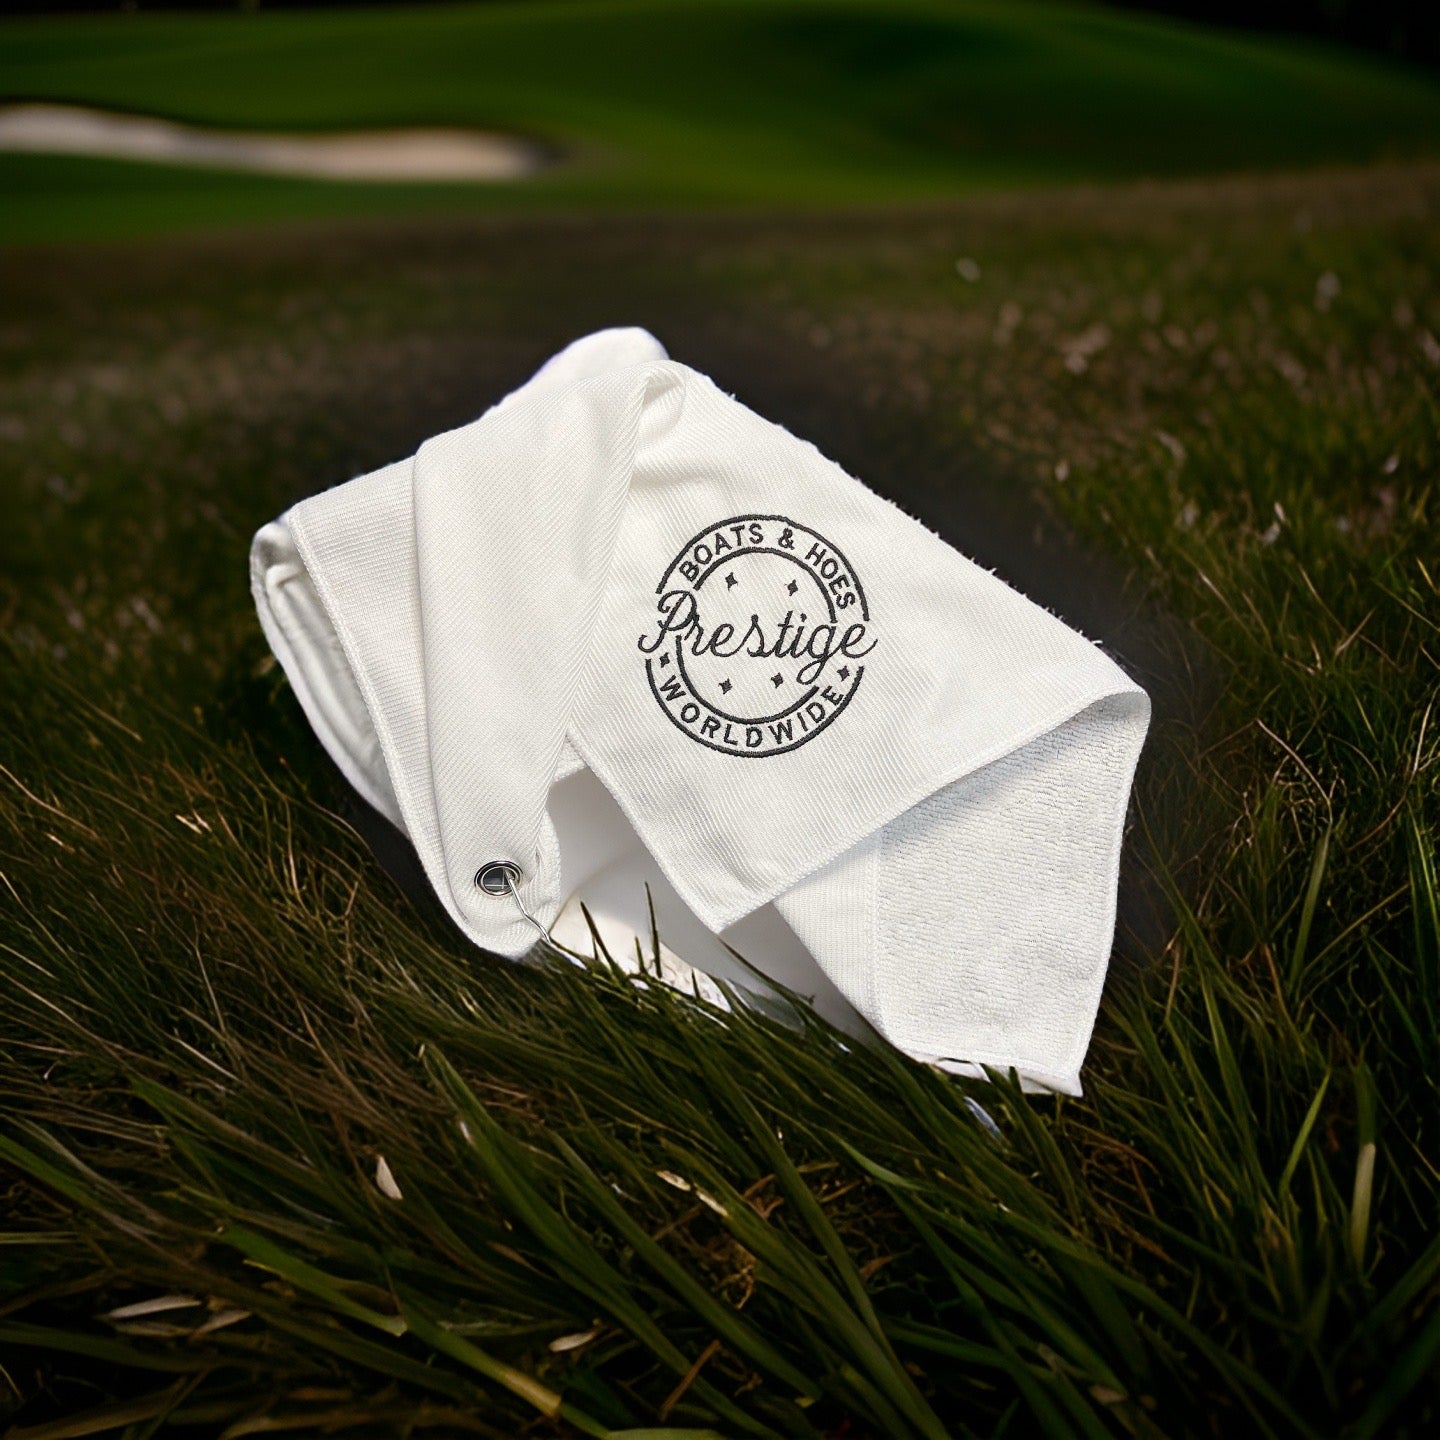 Prestige Worldwide 'Boats n Hoes' Microfiber Golf Towel - The Ultimate Golfer's Companion with a Twist of Humor